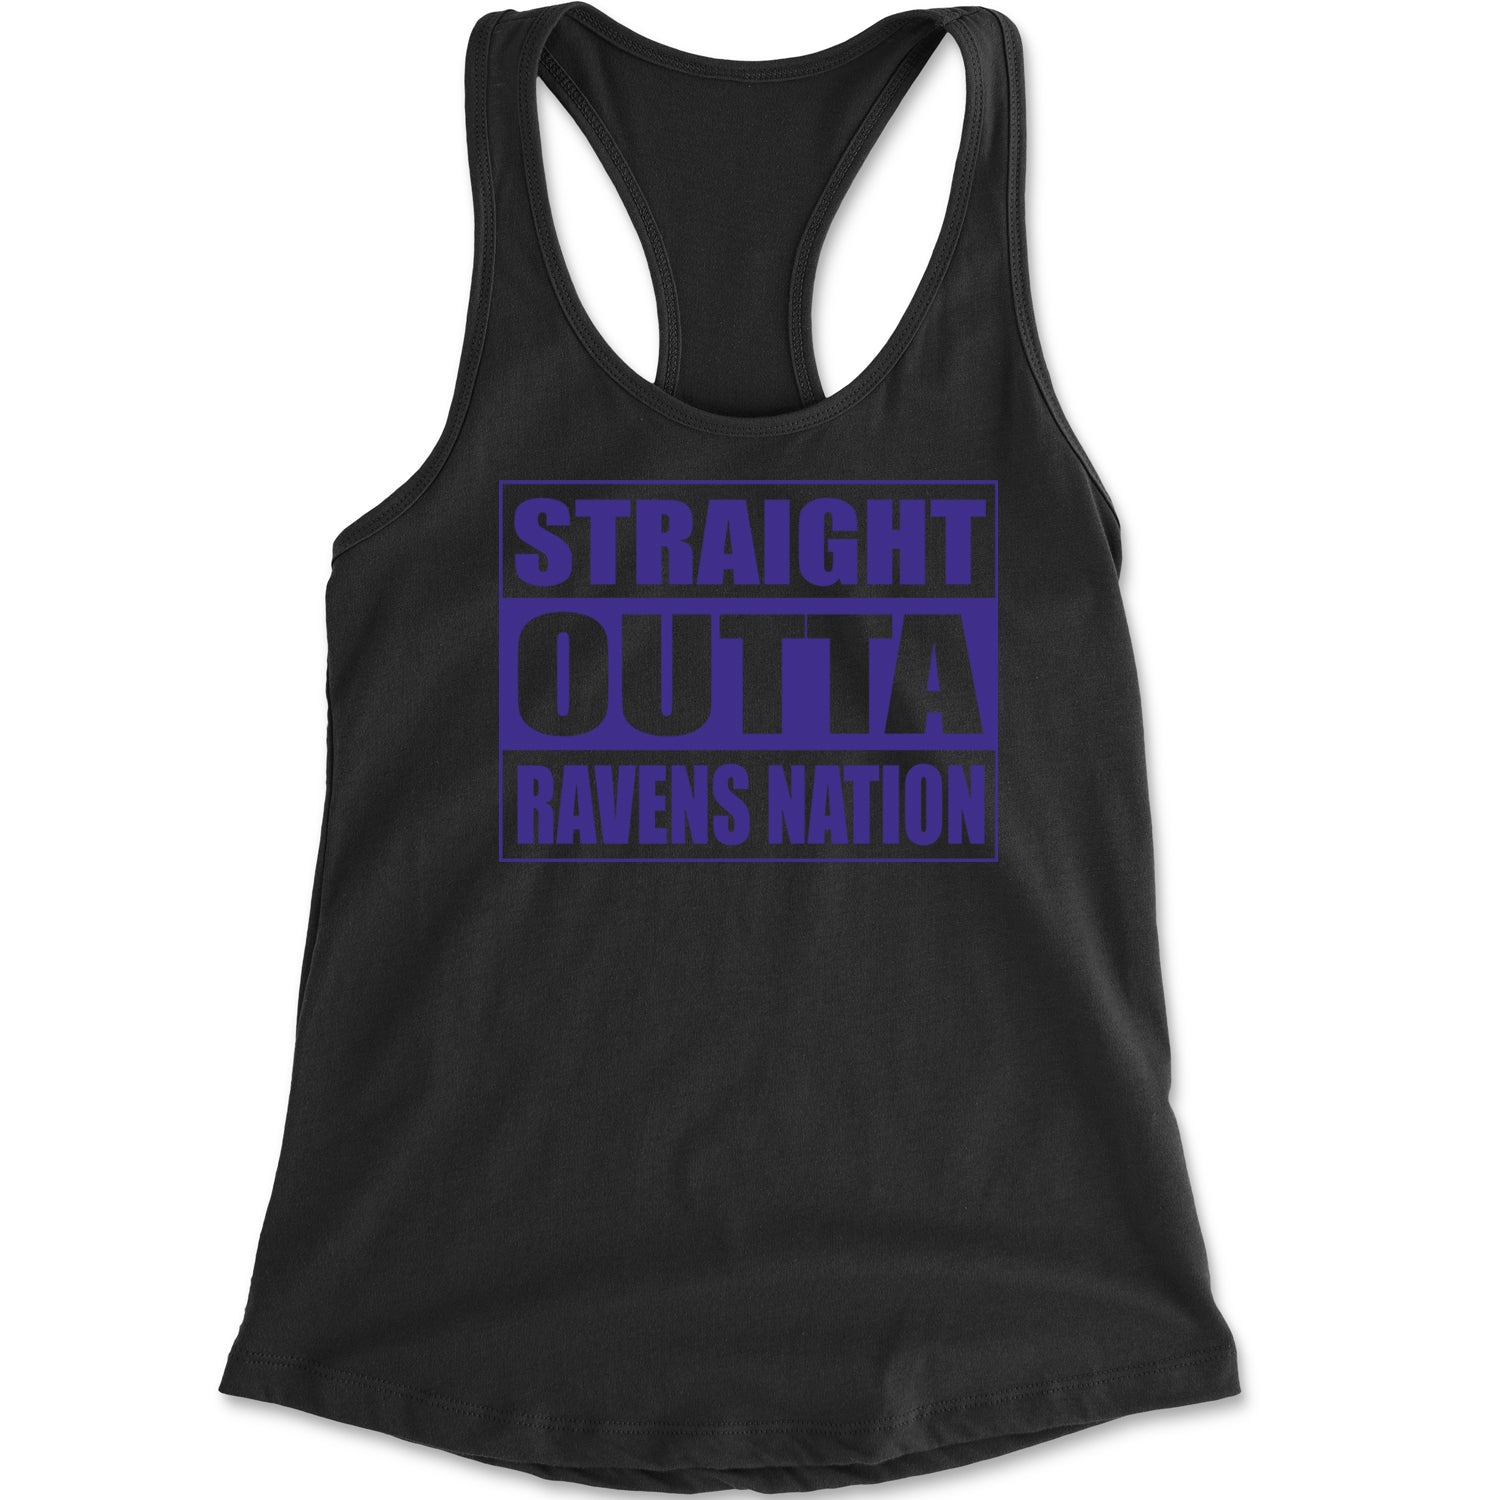 Straight Outta Ravens Nation Racerback Tank Top for Women